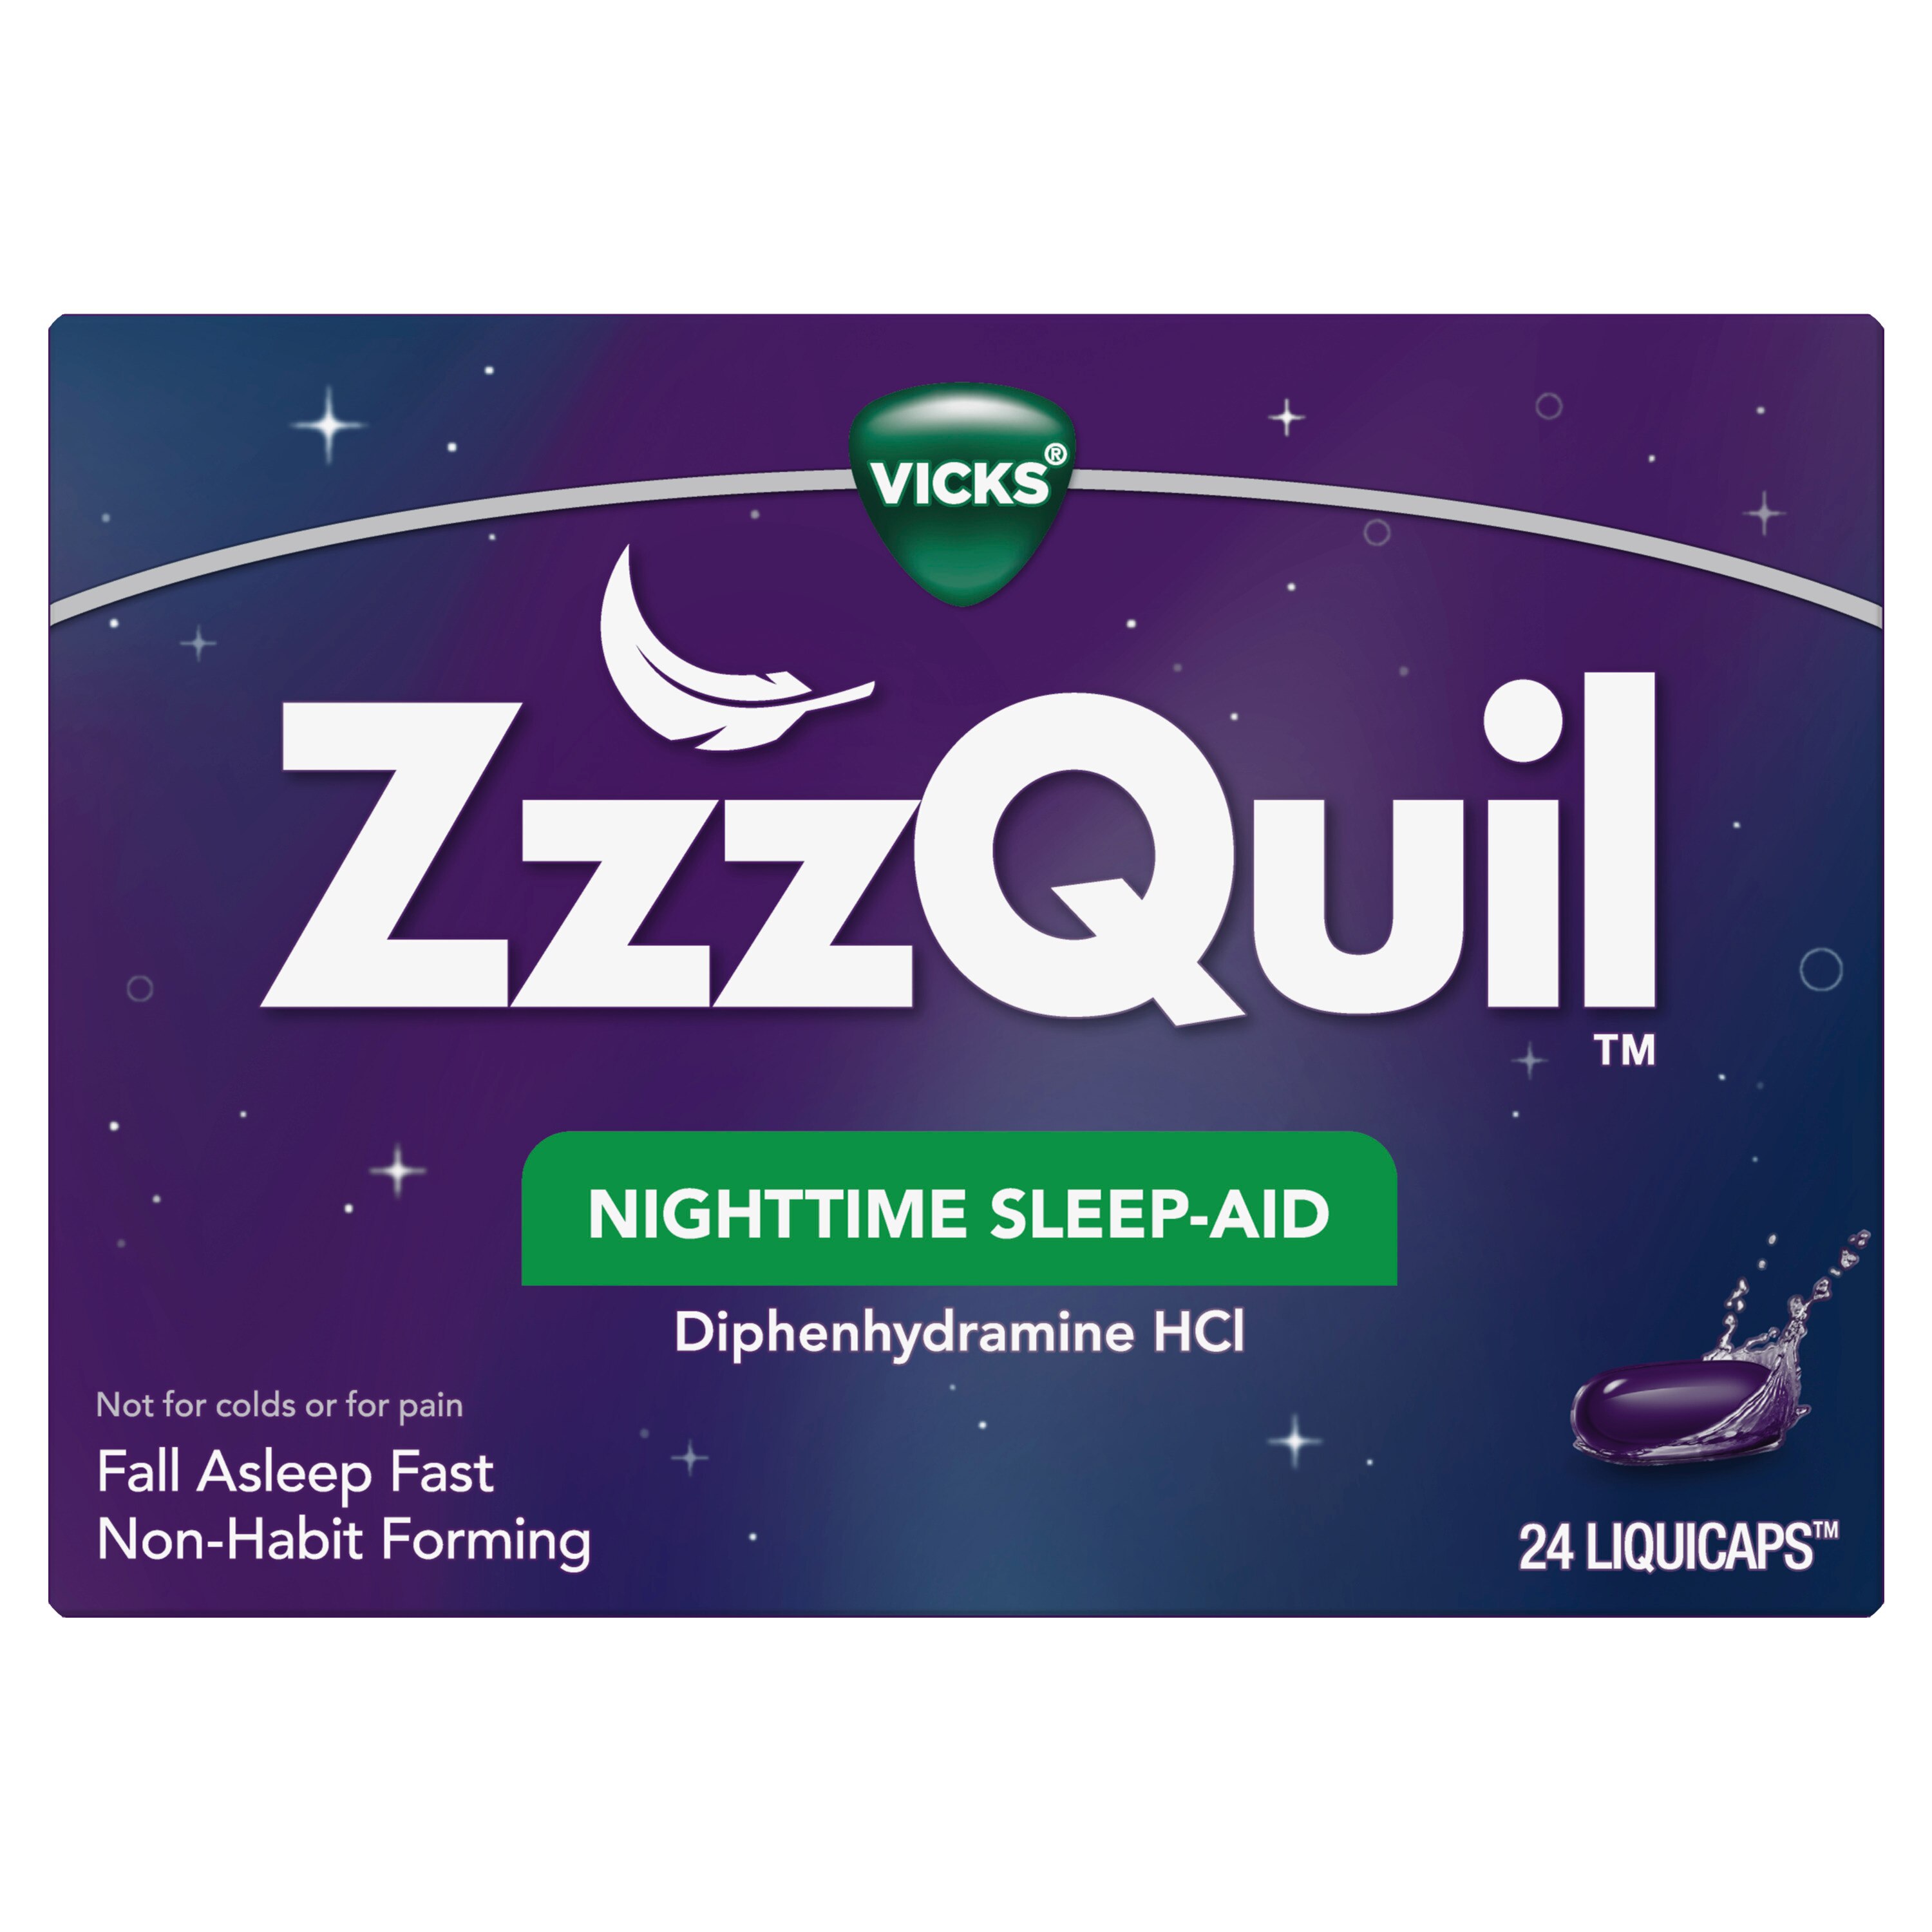 Vicks ZzzQuil Nighttime Sleep Aid, Non-Habit Forming, Fall Asleep Fast and Wake Refreshed, LiquiCaps